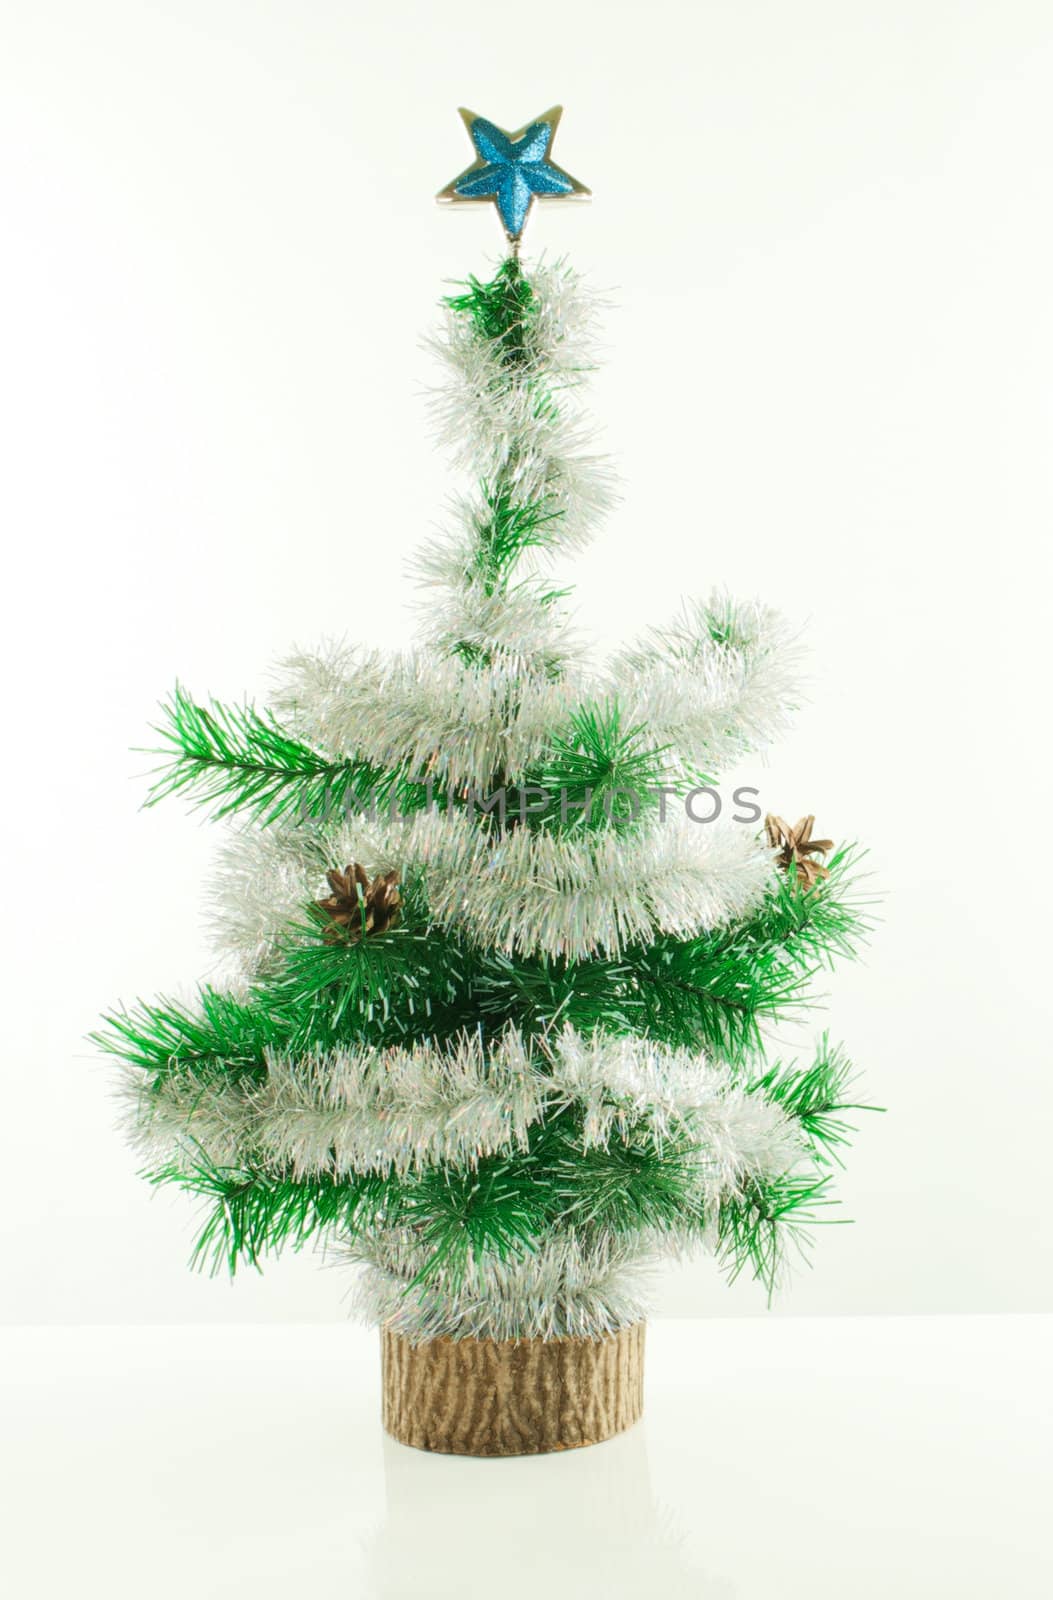 Decorated Christmas tree over white background